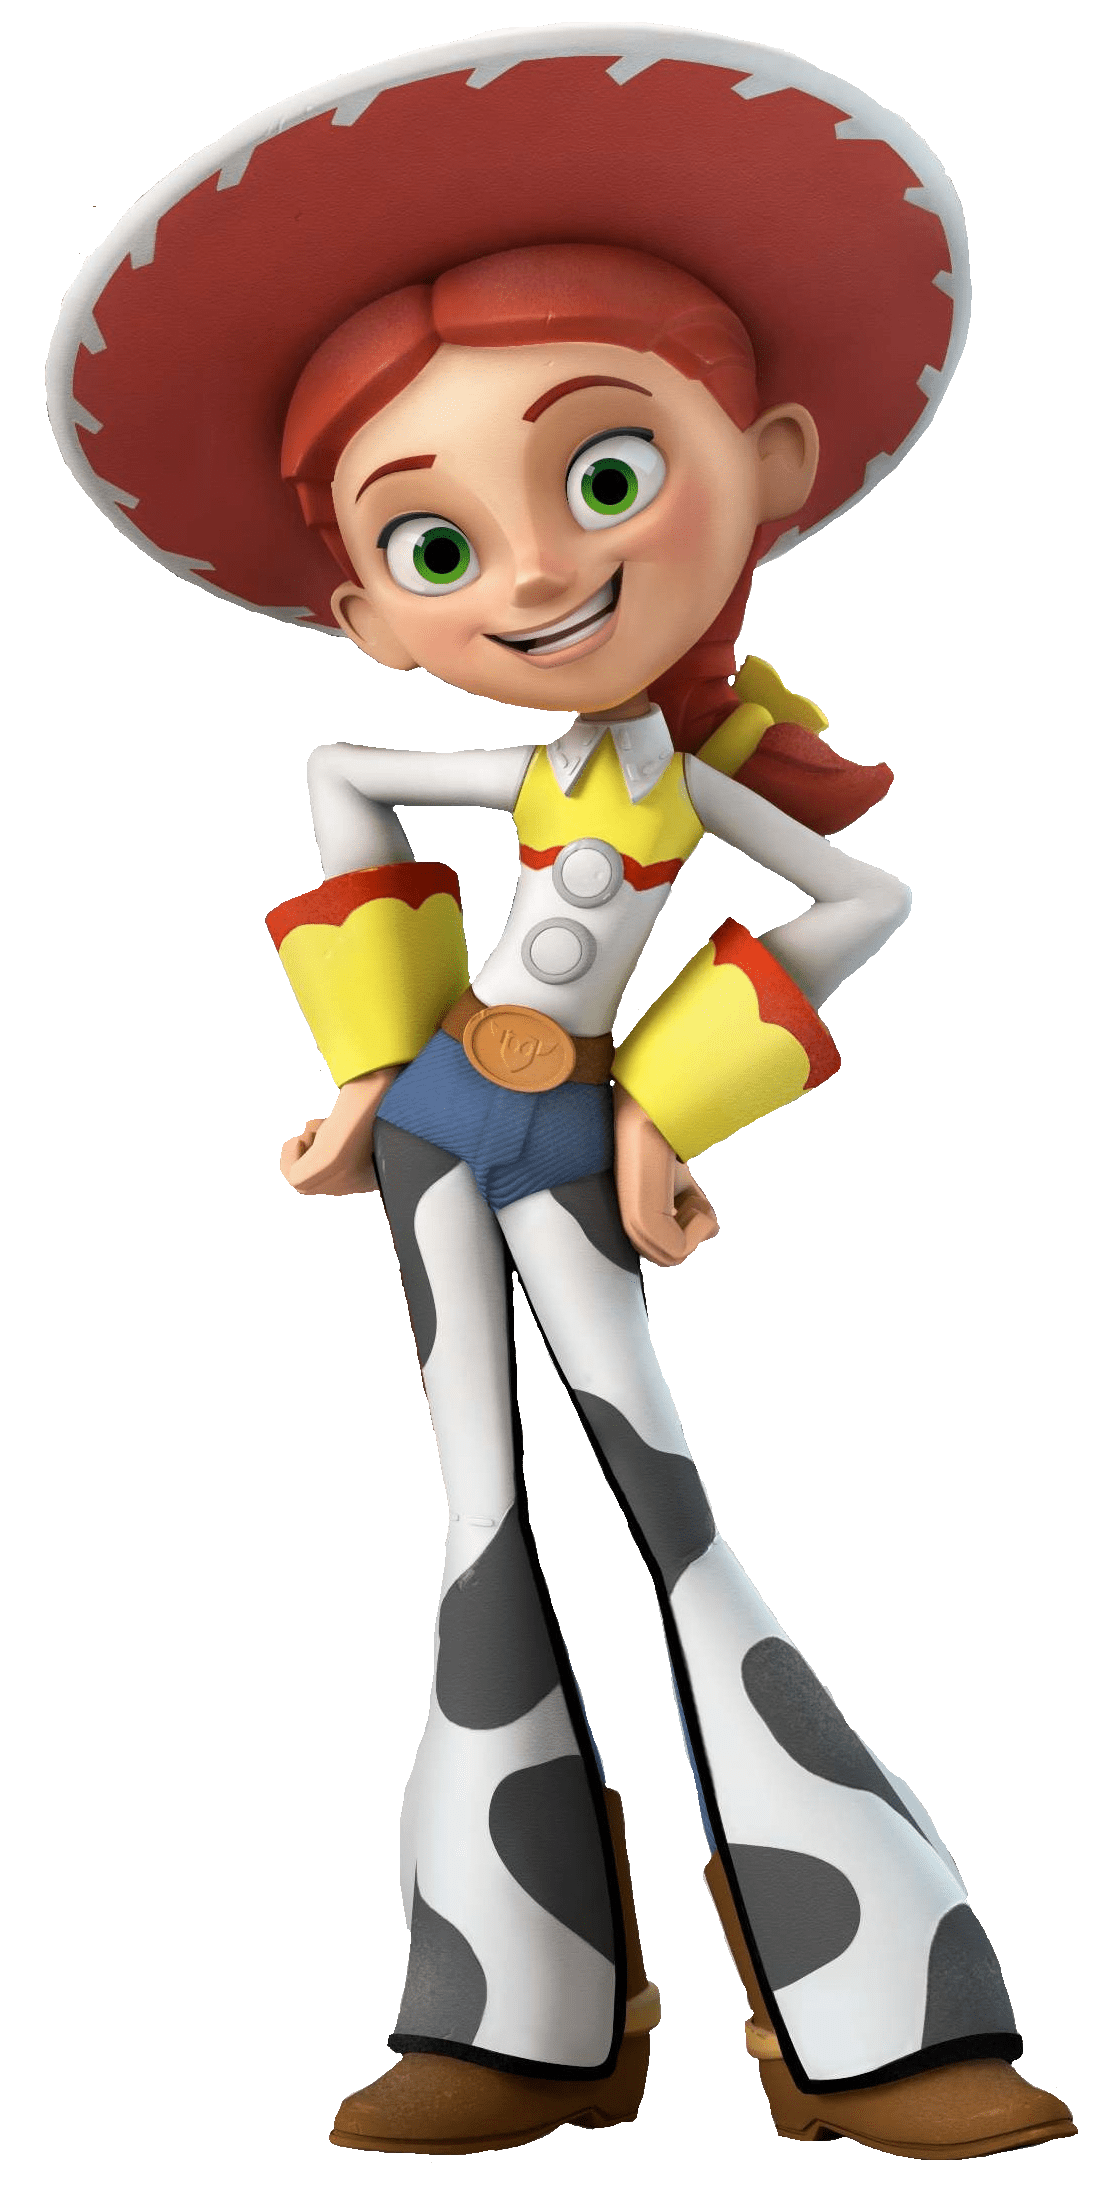 Details about   Disney Store “Cowgirl Jessie” Interactive Talking Figure from Toy Story 4-NEW 